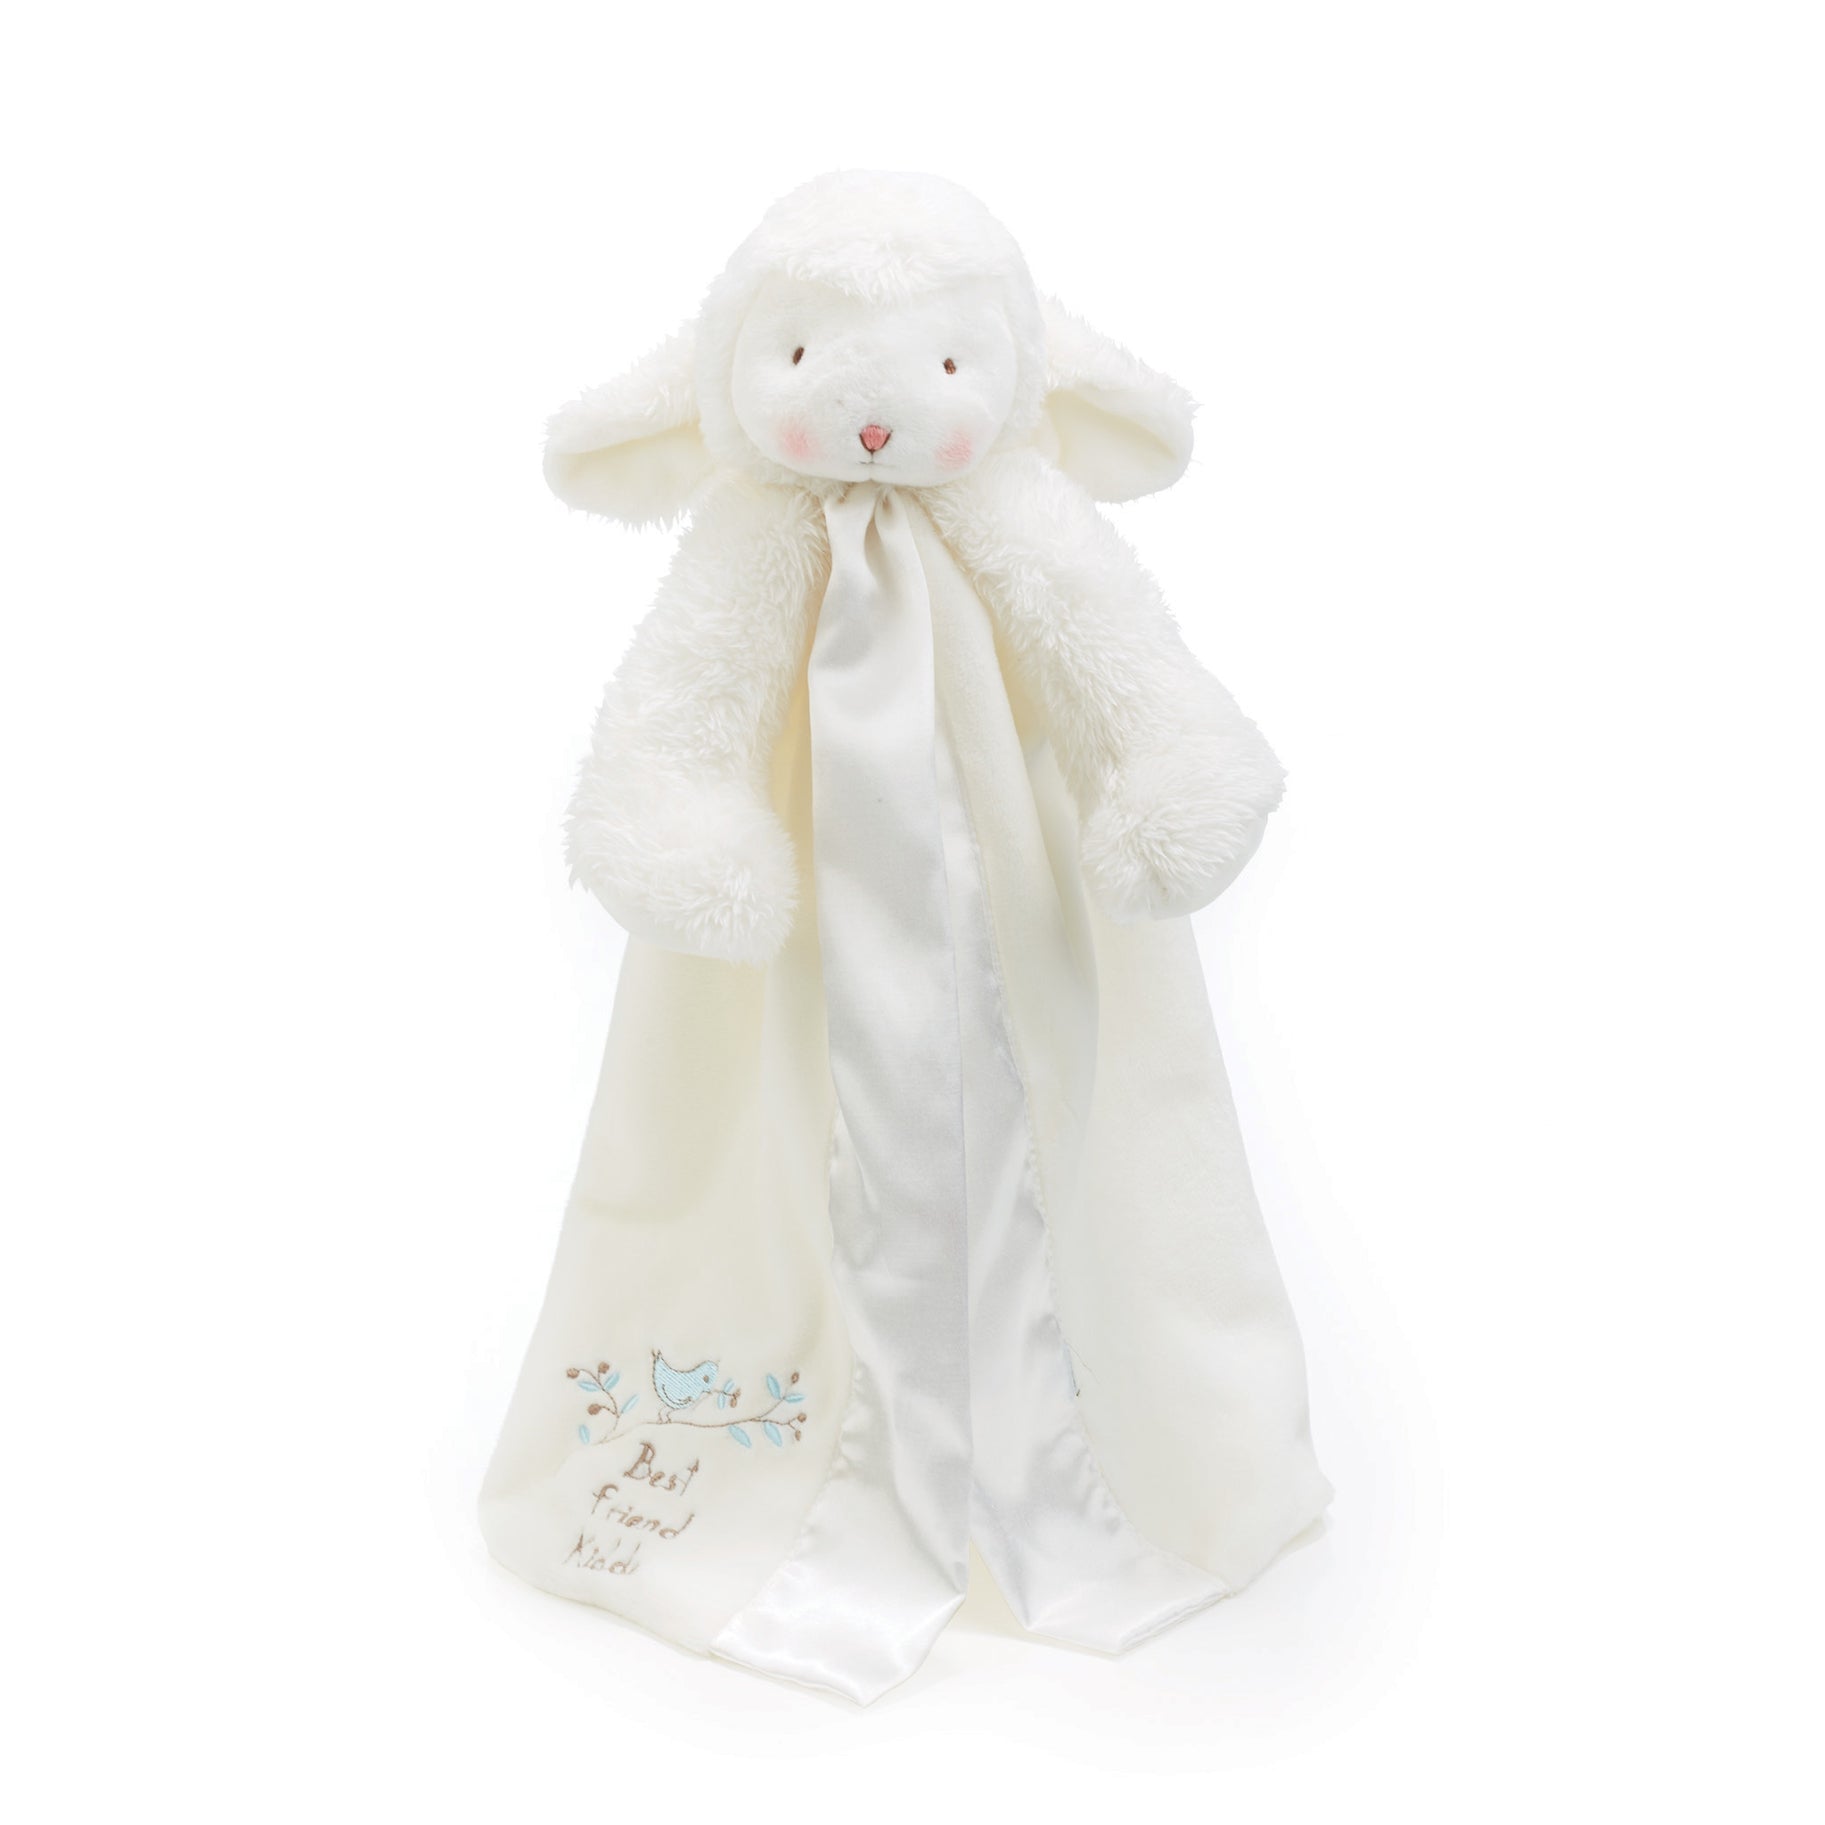 BTF - Bunnies by the Bay Bunnies By The Bay Kiddo Lamb Buddy Blanket - Little Miss Muffin Children & Home